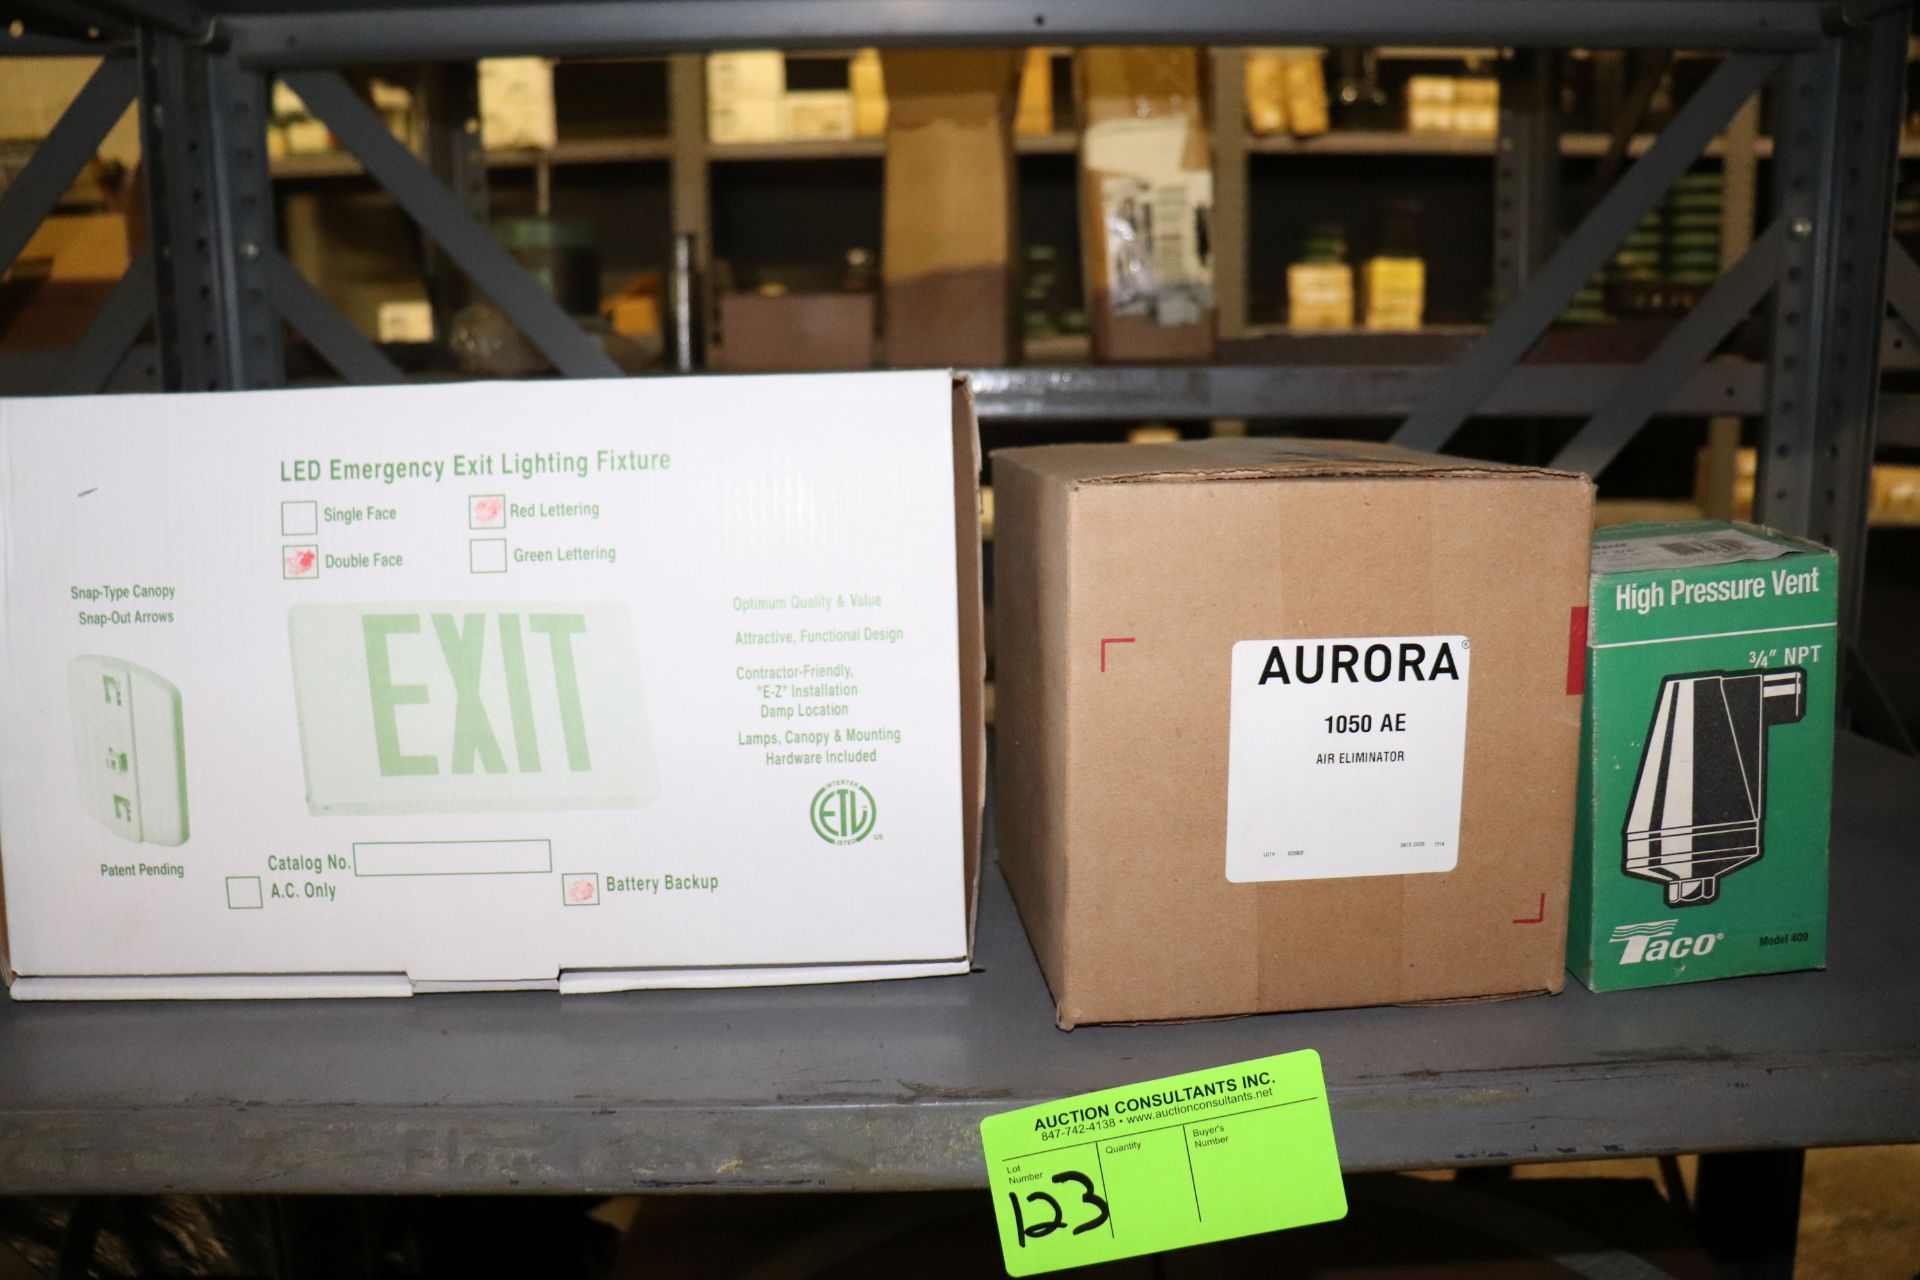 LED emergency exit lighting fixture, Aurora air eliminator, and Taco high pressure vent